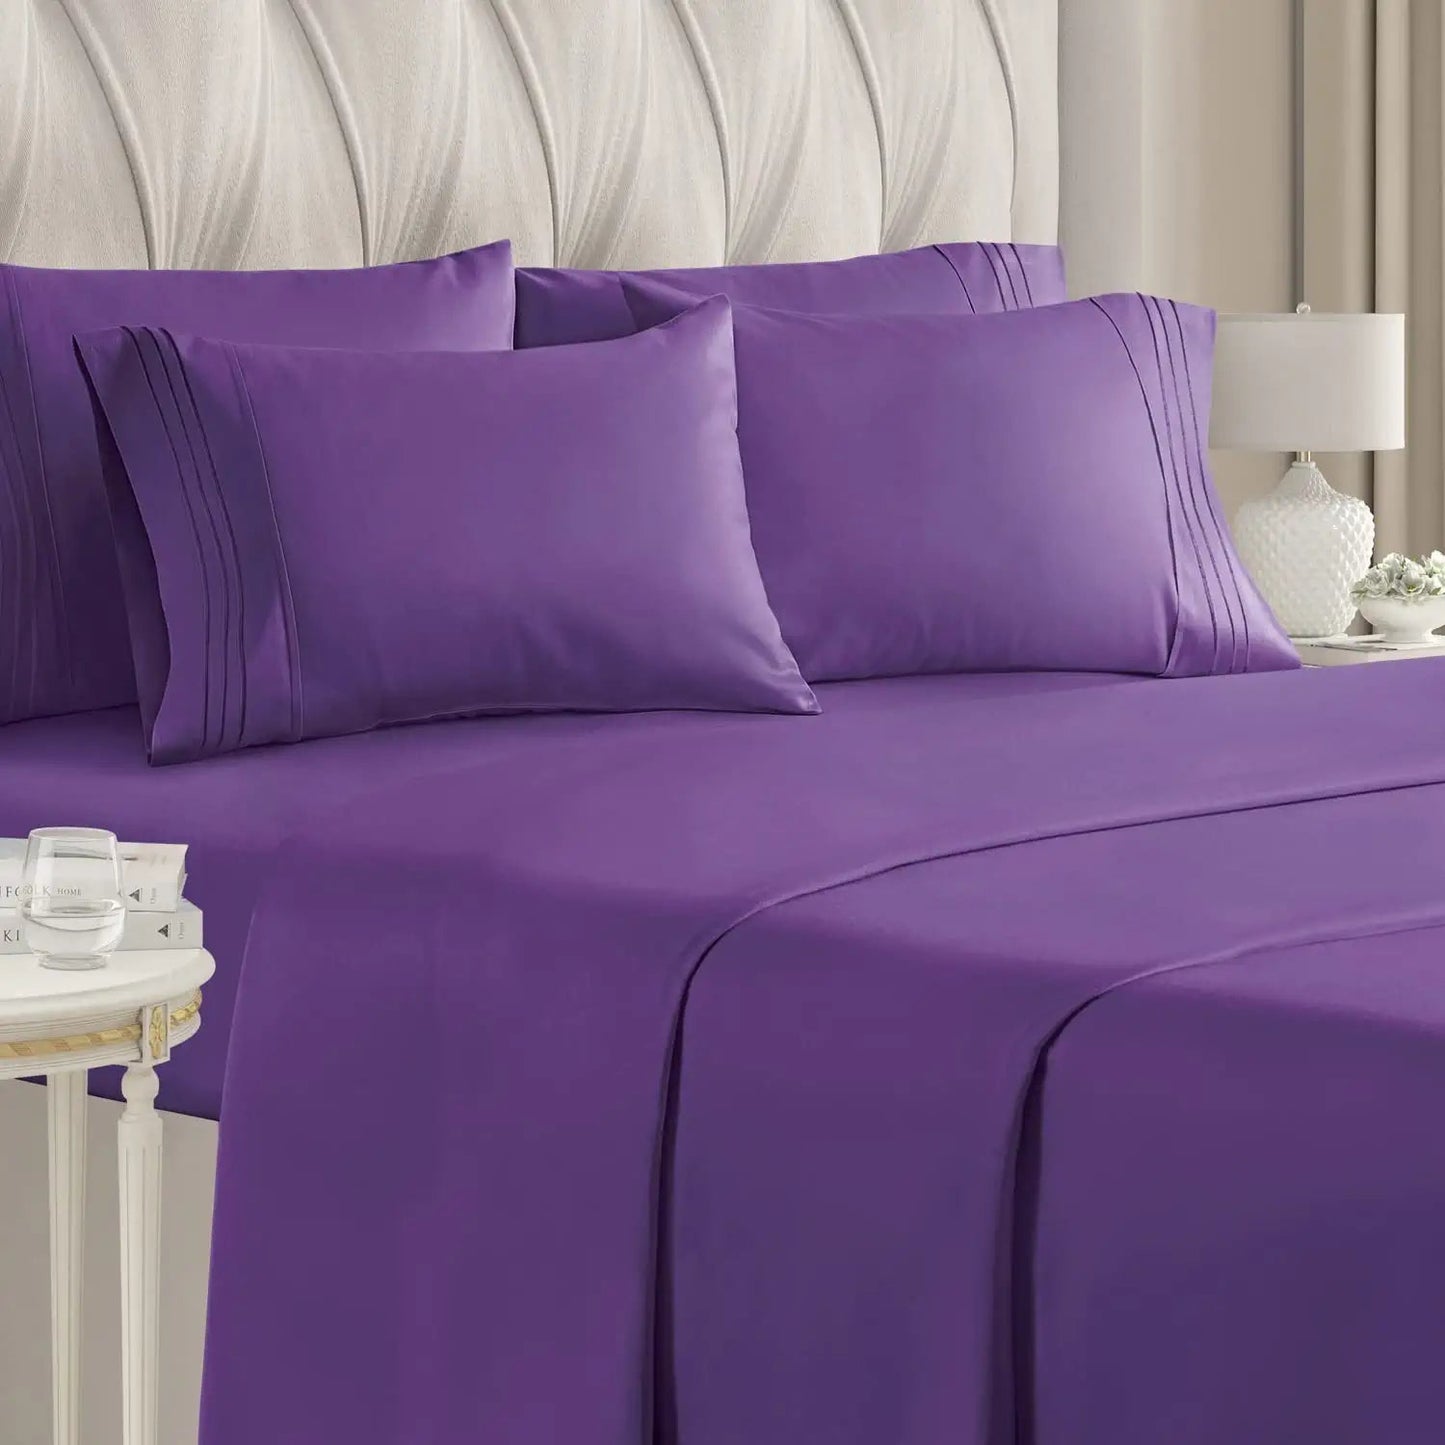 Buy Stripe Violet Sheet Set 1000tc Queen or Cal-King Sheets at- Egyptianhomelinens.com